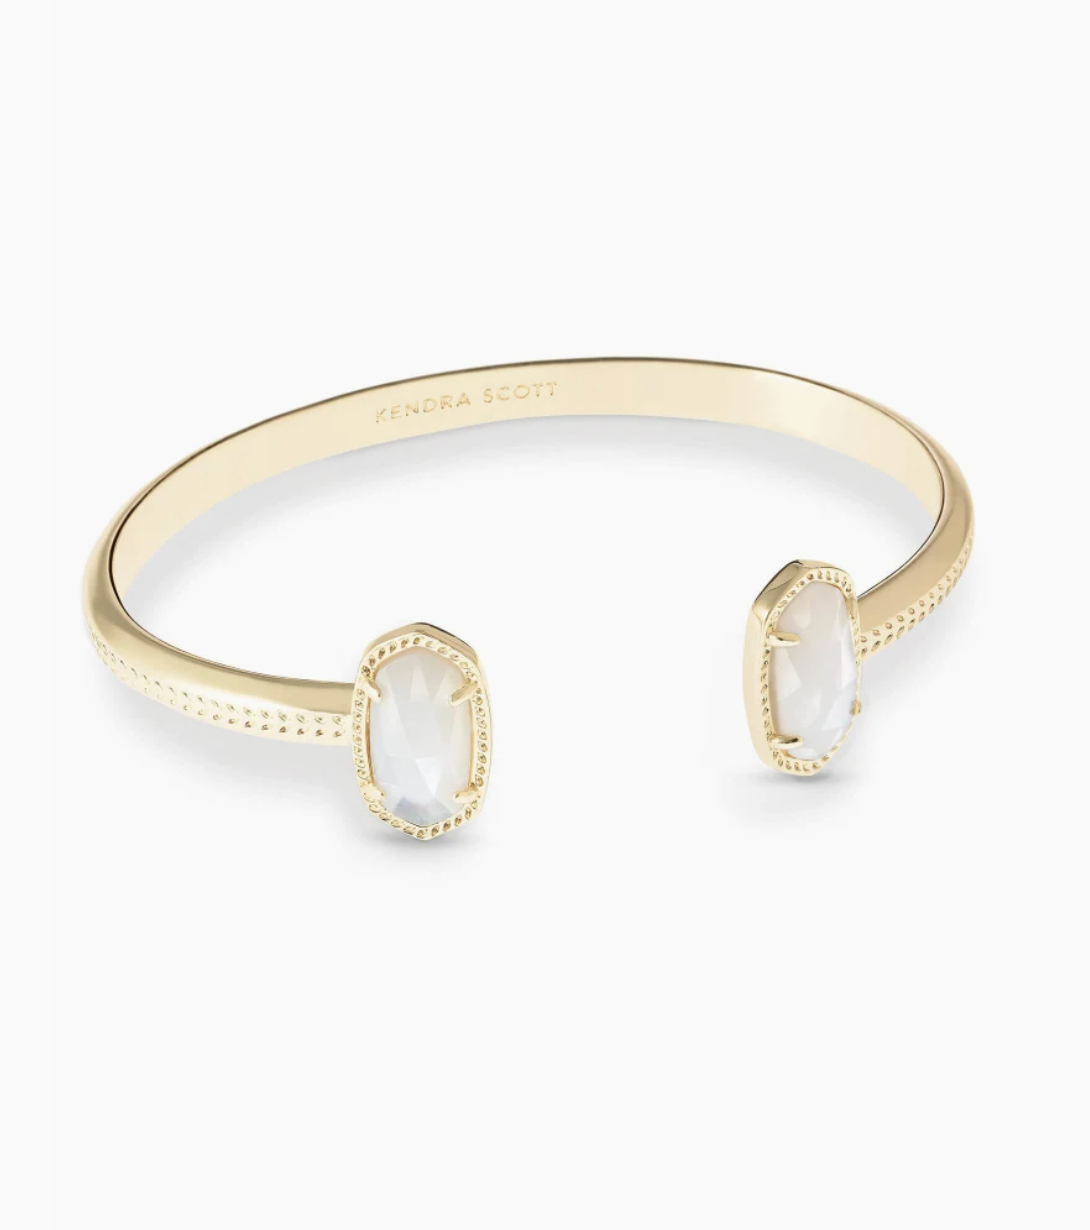 Elton Gold Cuff Bracelet in Ivory Mother-of-Pearl